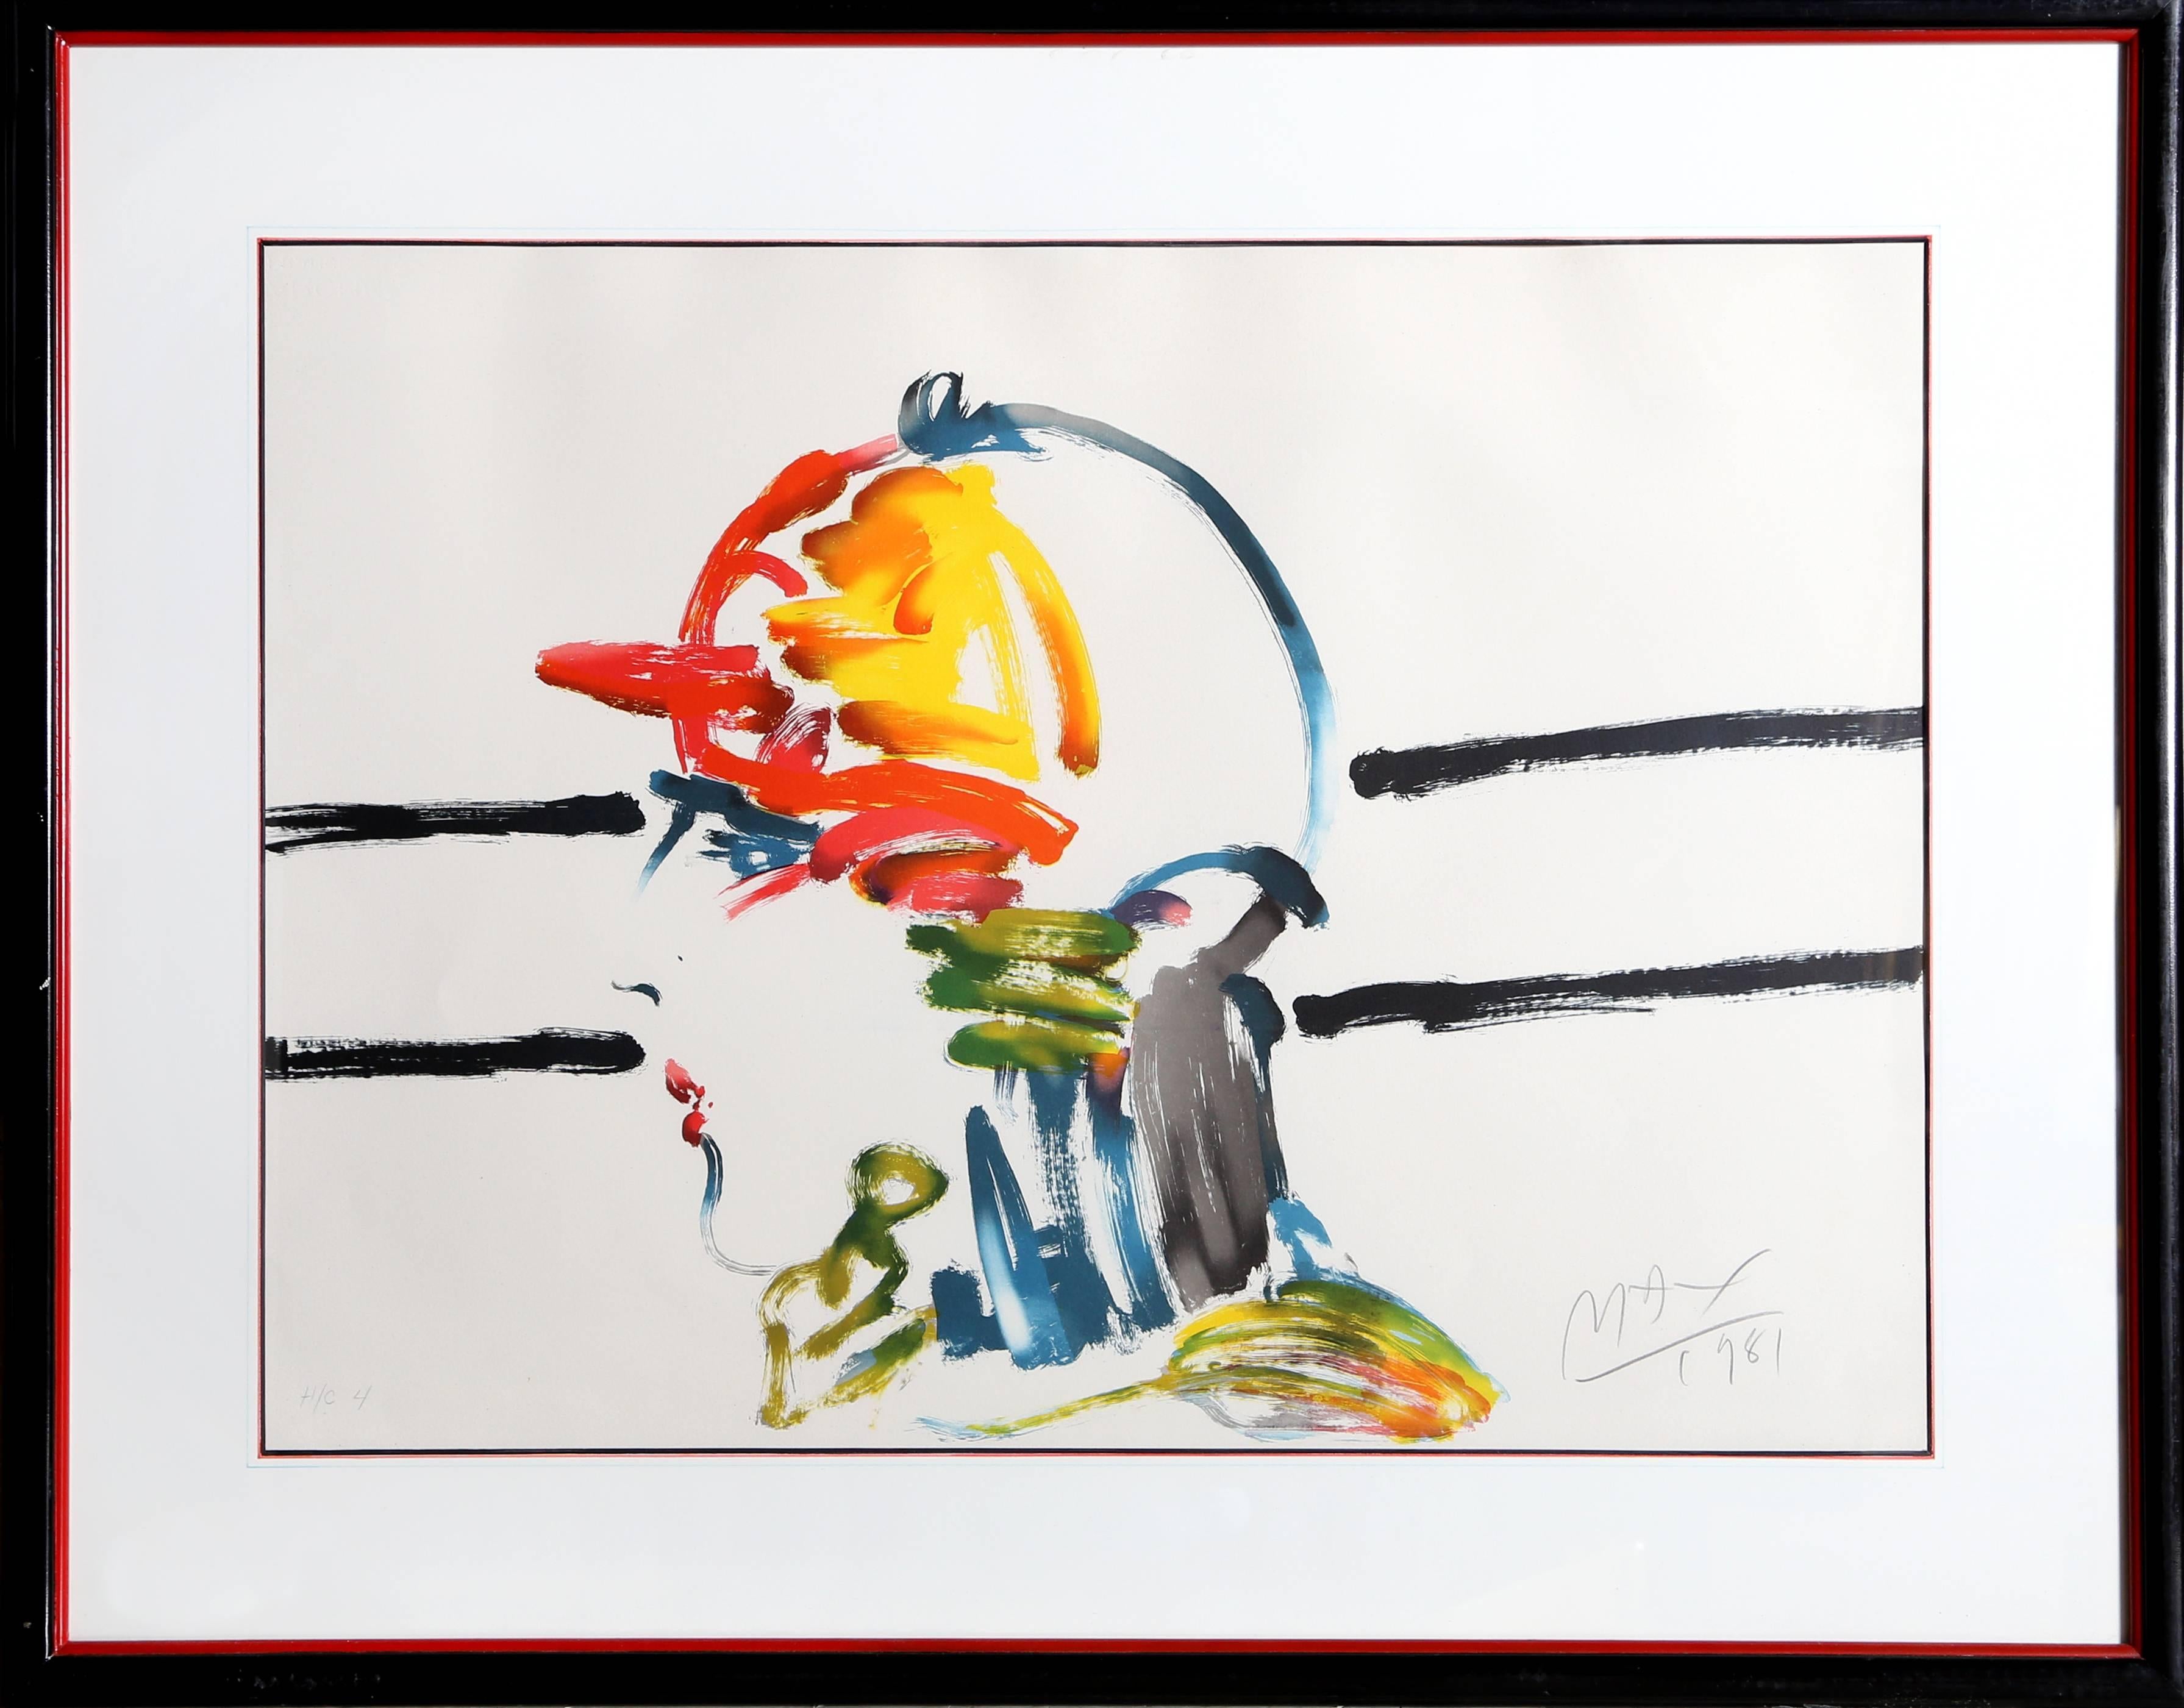 The Jockey, Pop Art lithograph by Peter Max 1981